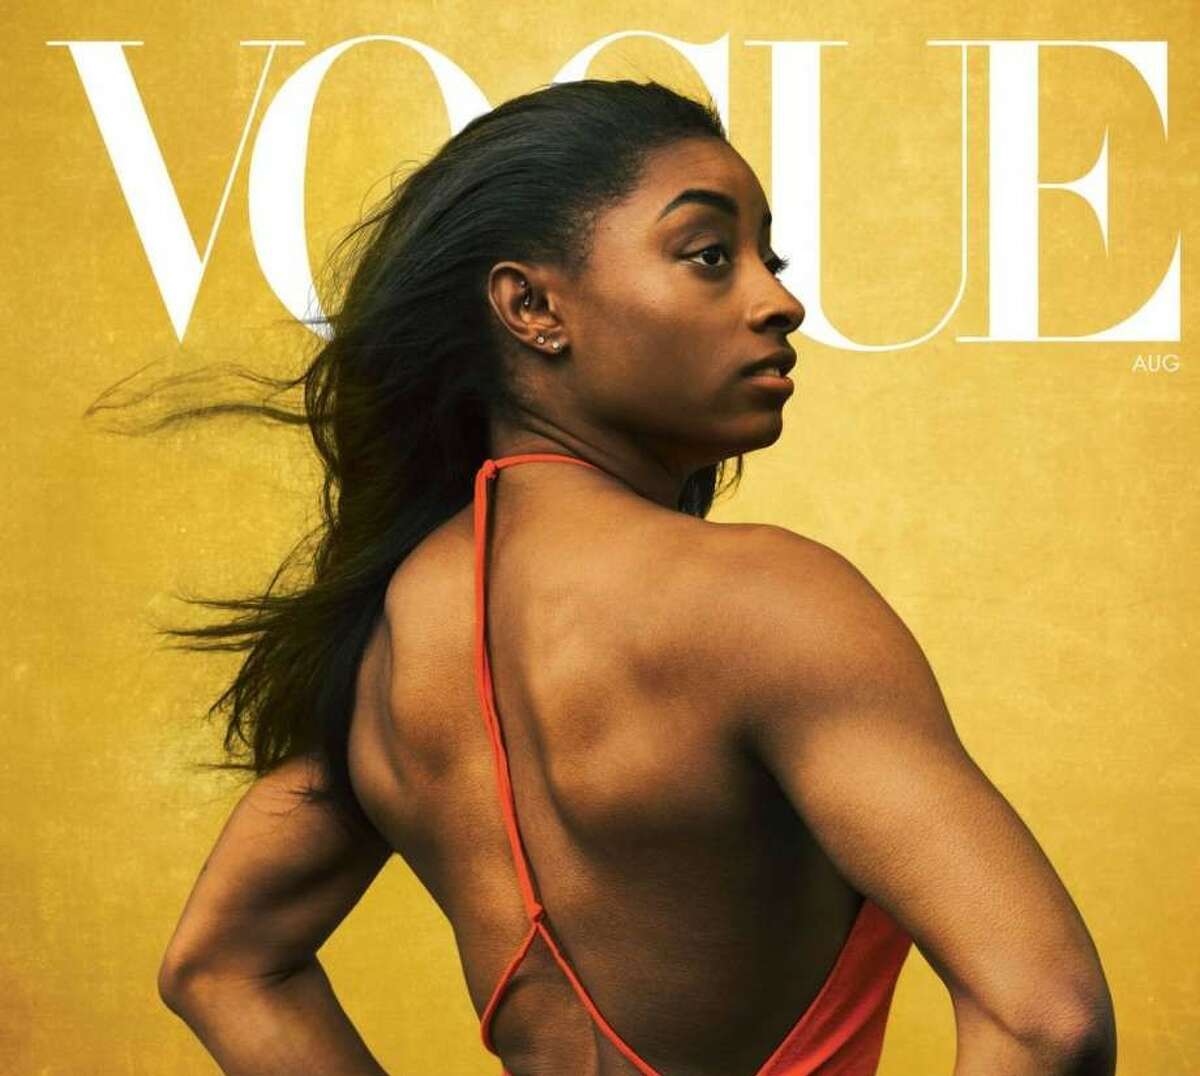 Simone Biles on the cover of the August 2020 issue of Vogue magazine